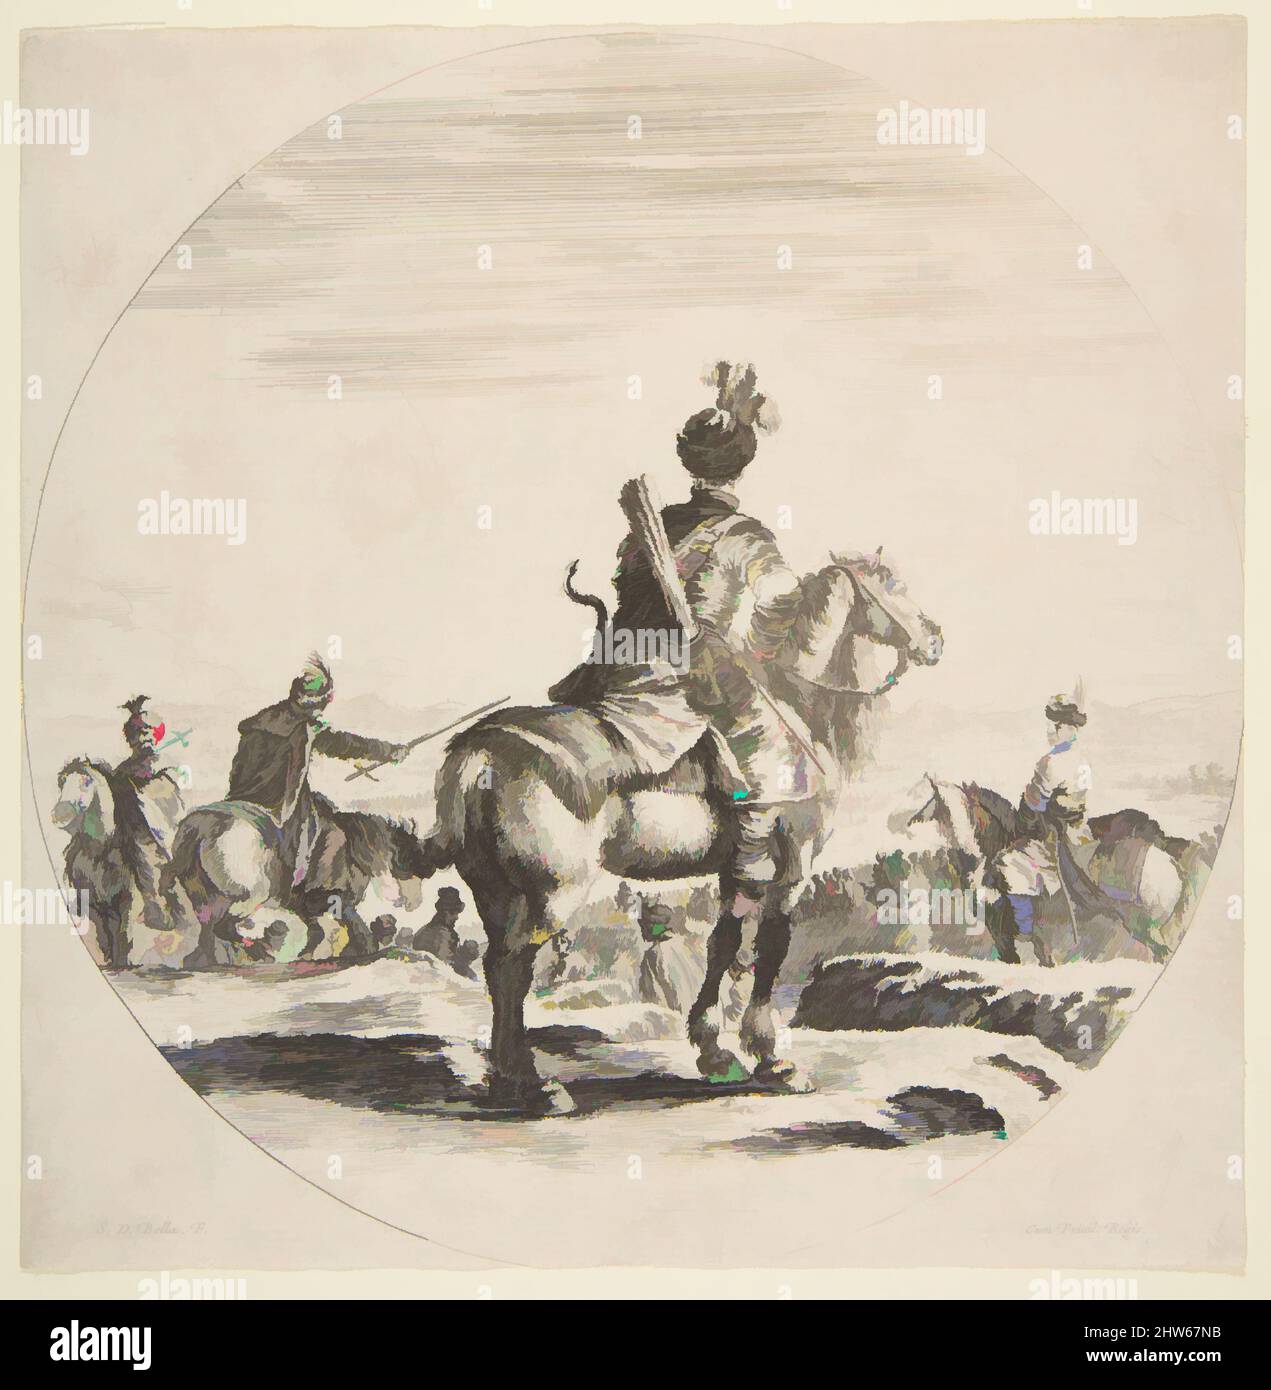 Art inspired by Polish horseman with a bow and arrow, seen from behind with his horse facing right, a circular composition, from 'Figures on Horseback' (Cavaliers nègres, polonais et hongrois), ca. 1651, Etching, Sheet (trimmed to plate): 7 3/8 × 7 3/16 in. (18.7 × 18.3 cm), Prints, Classic works modernized by Artotop with a splash of modernity. Shapes, color and value, eye-catching visual impact on art. Emotions through freedom of artworks in a contemporary way. A timeless message pursuing a wildly creative new direction. Artists turning to the digital medium and creating the Artotop NFT Stock Photo